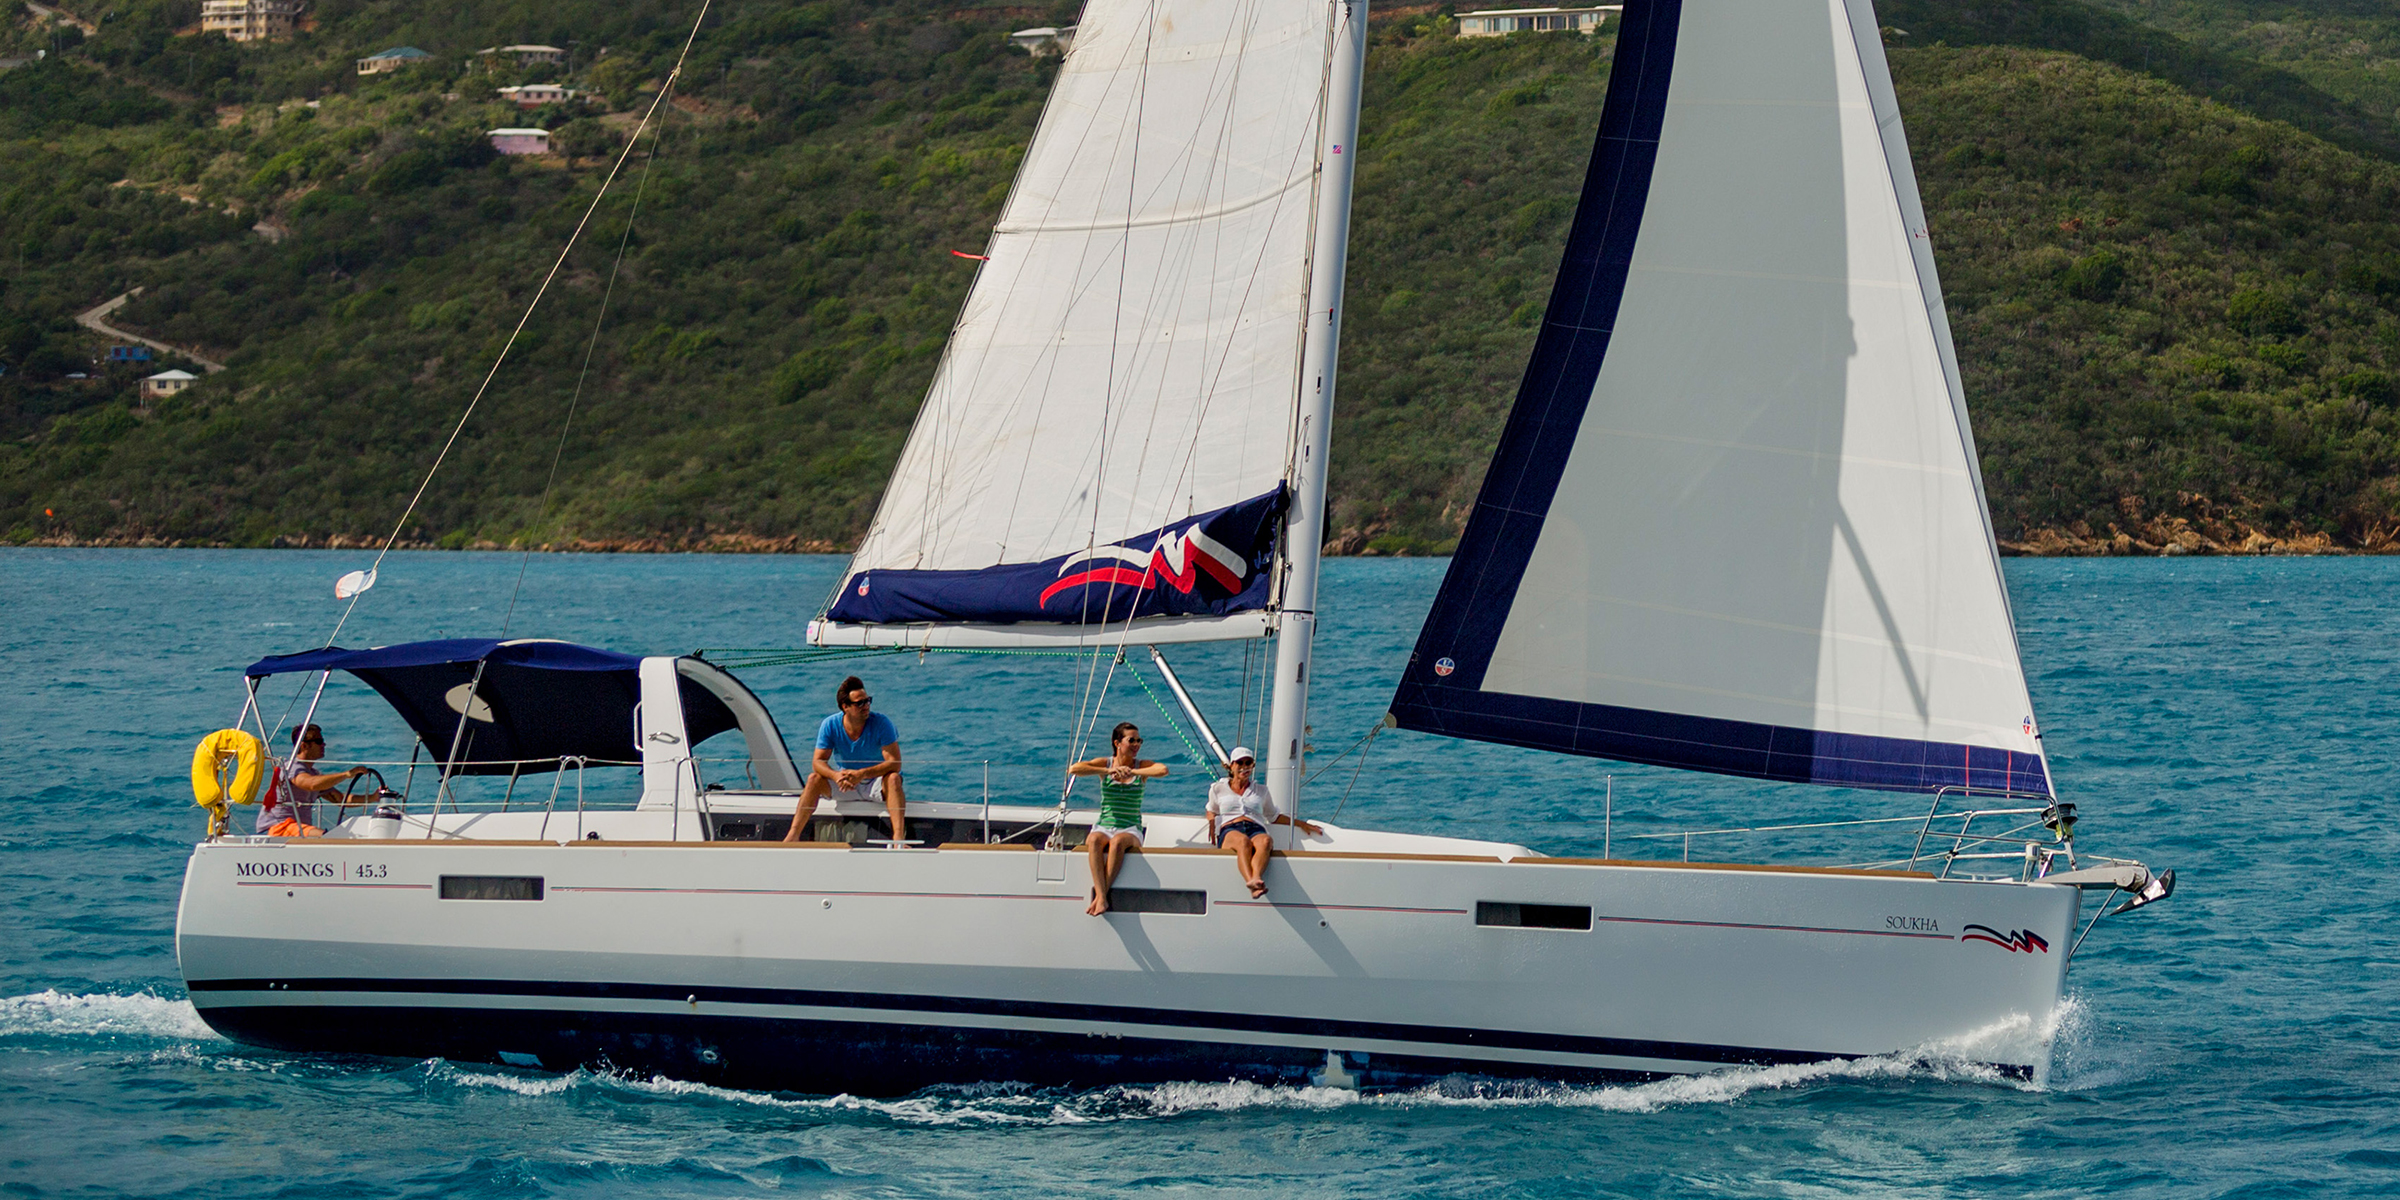 Oceanis 45 - Sailboat Charter Saint Lucia & Boat hire in St. Lucia Gros Islet Rodney Bay Marina 3